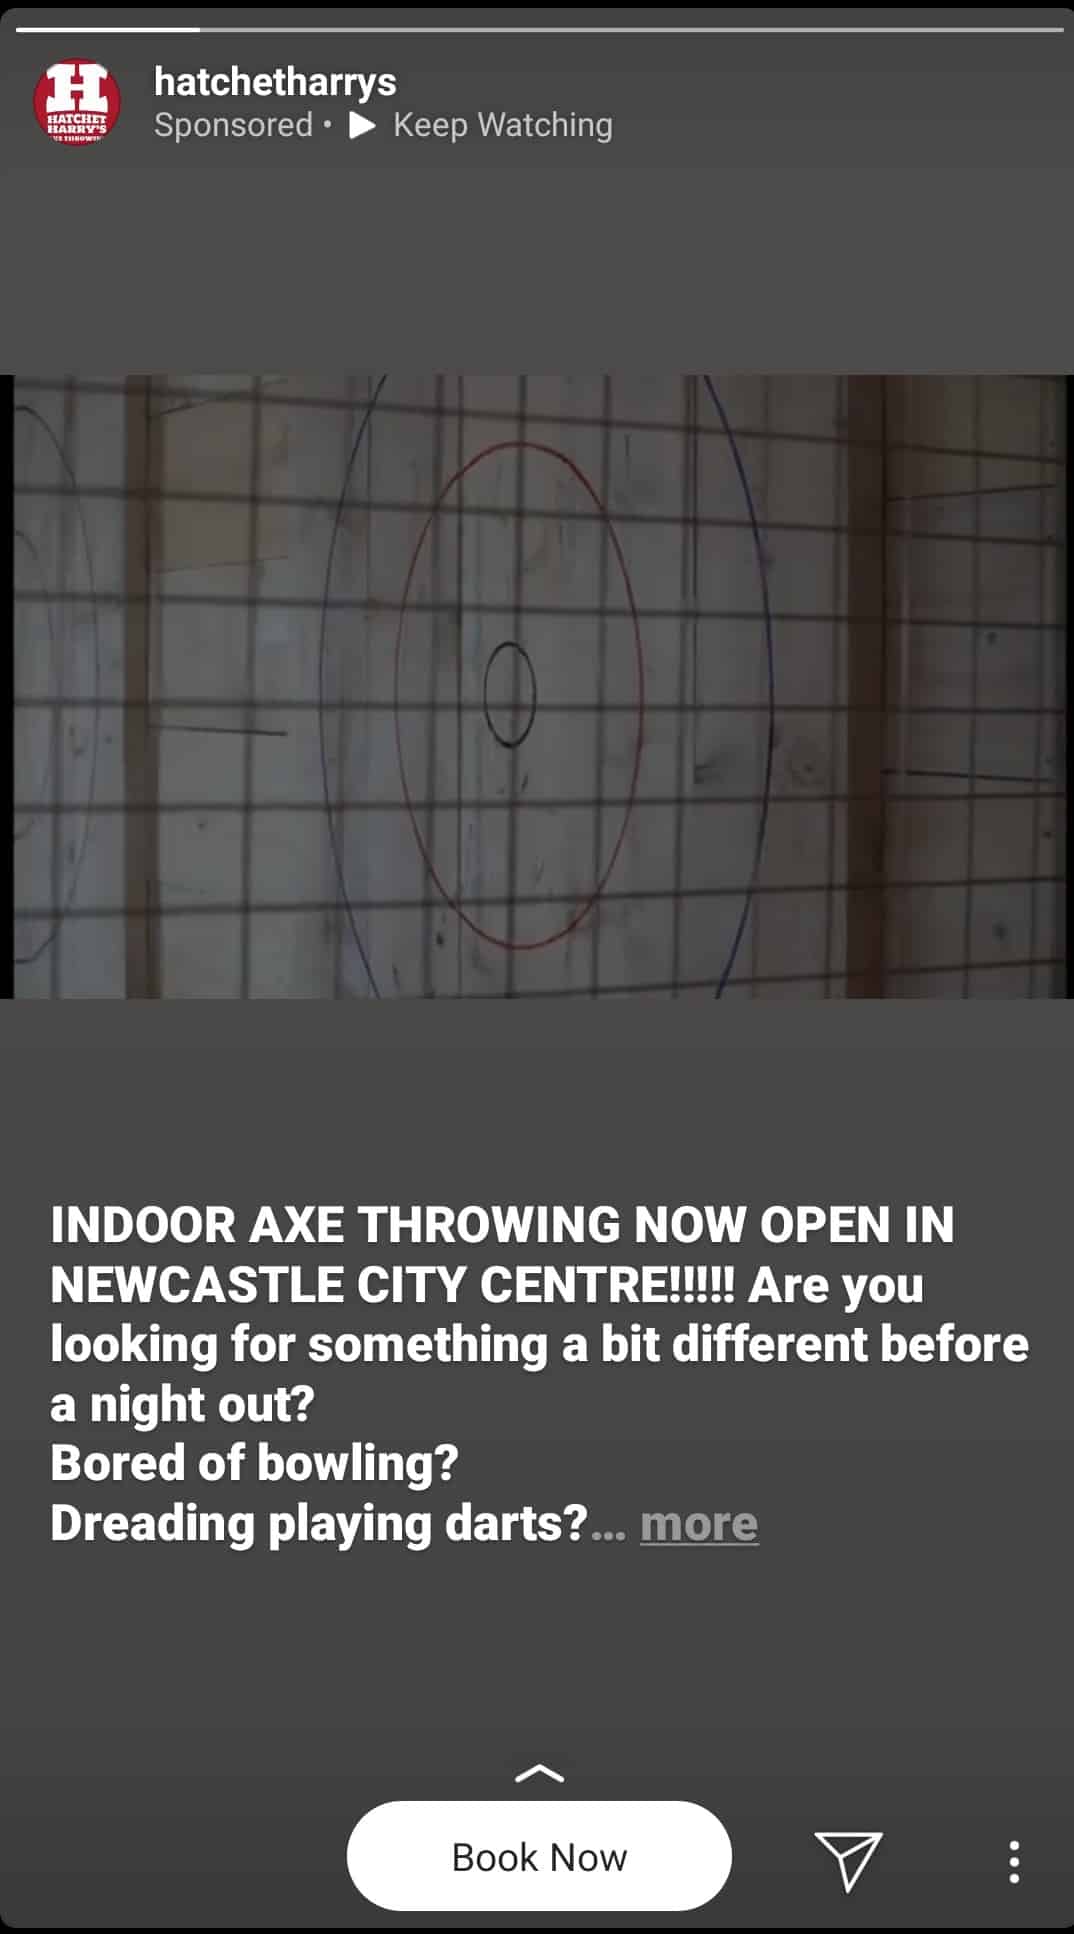 An instagram stories advert that has a small horizontal video and a lot of text that is eventually cut off at the bottom